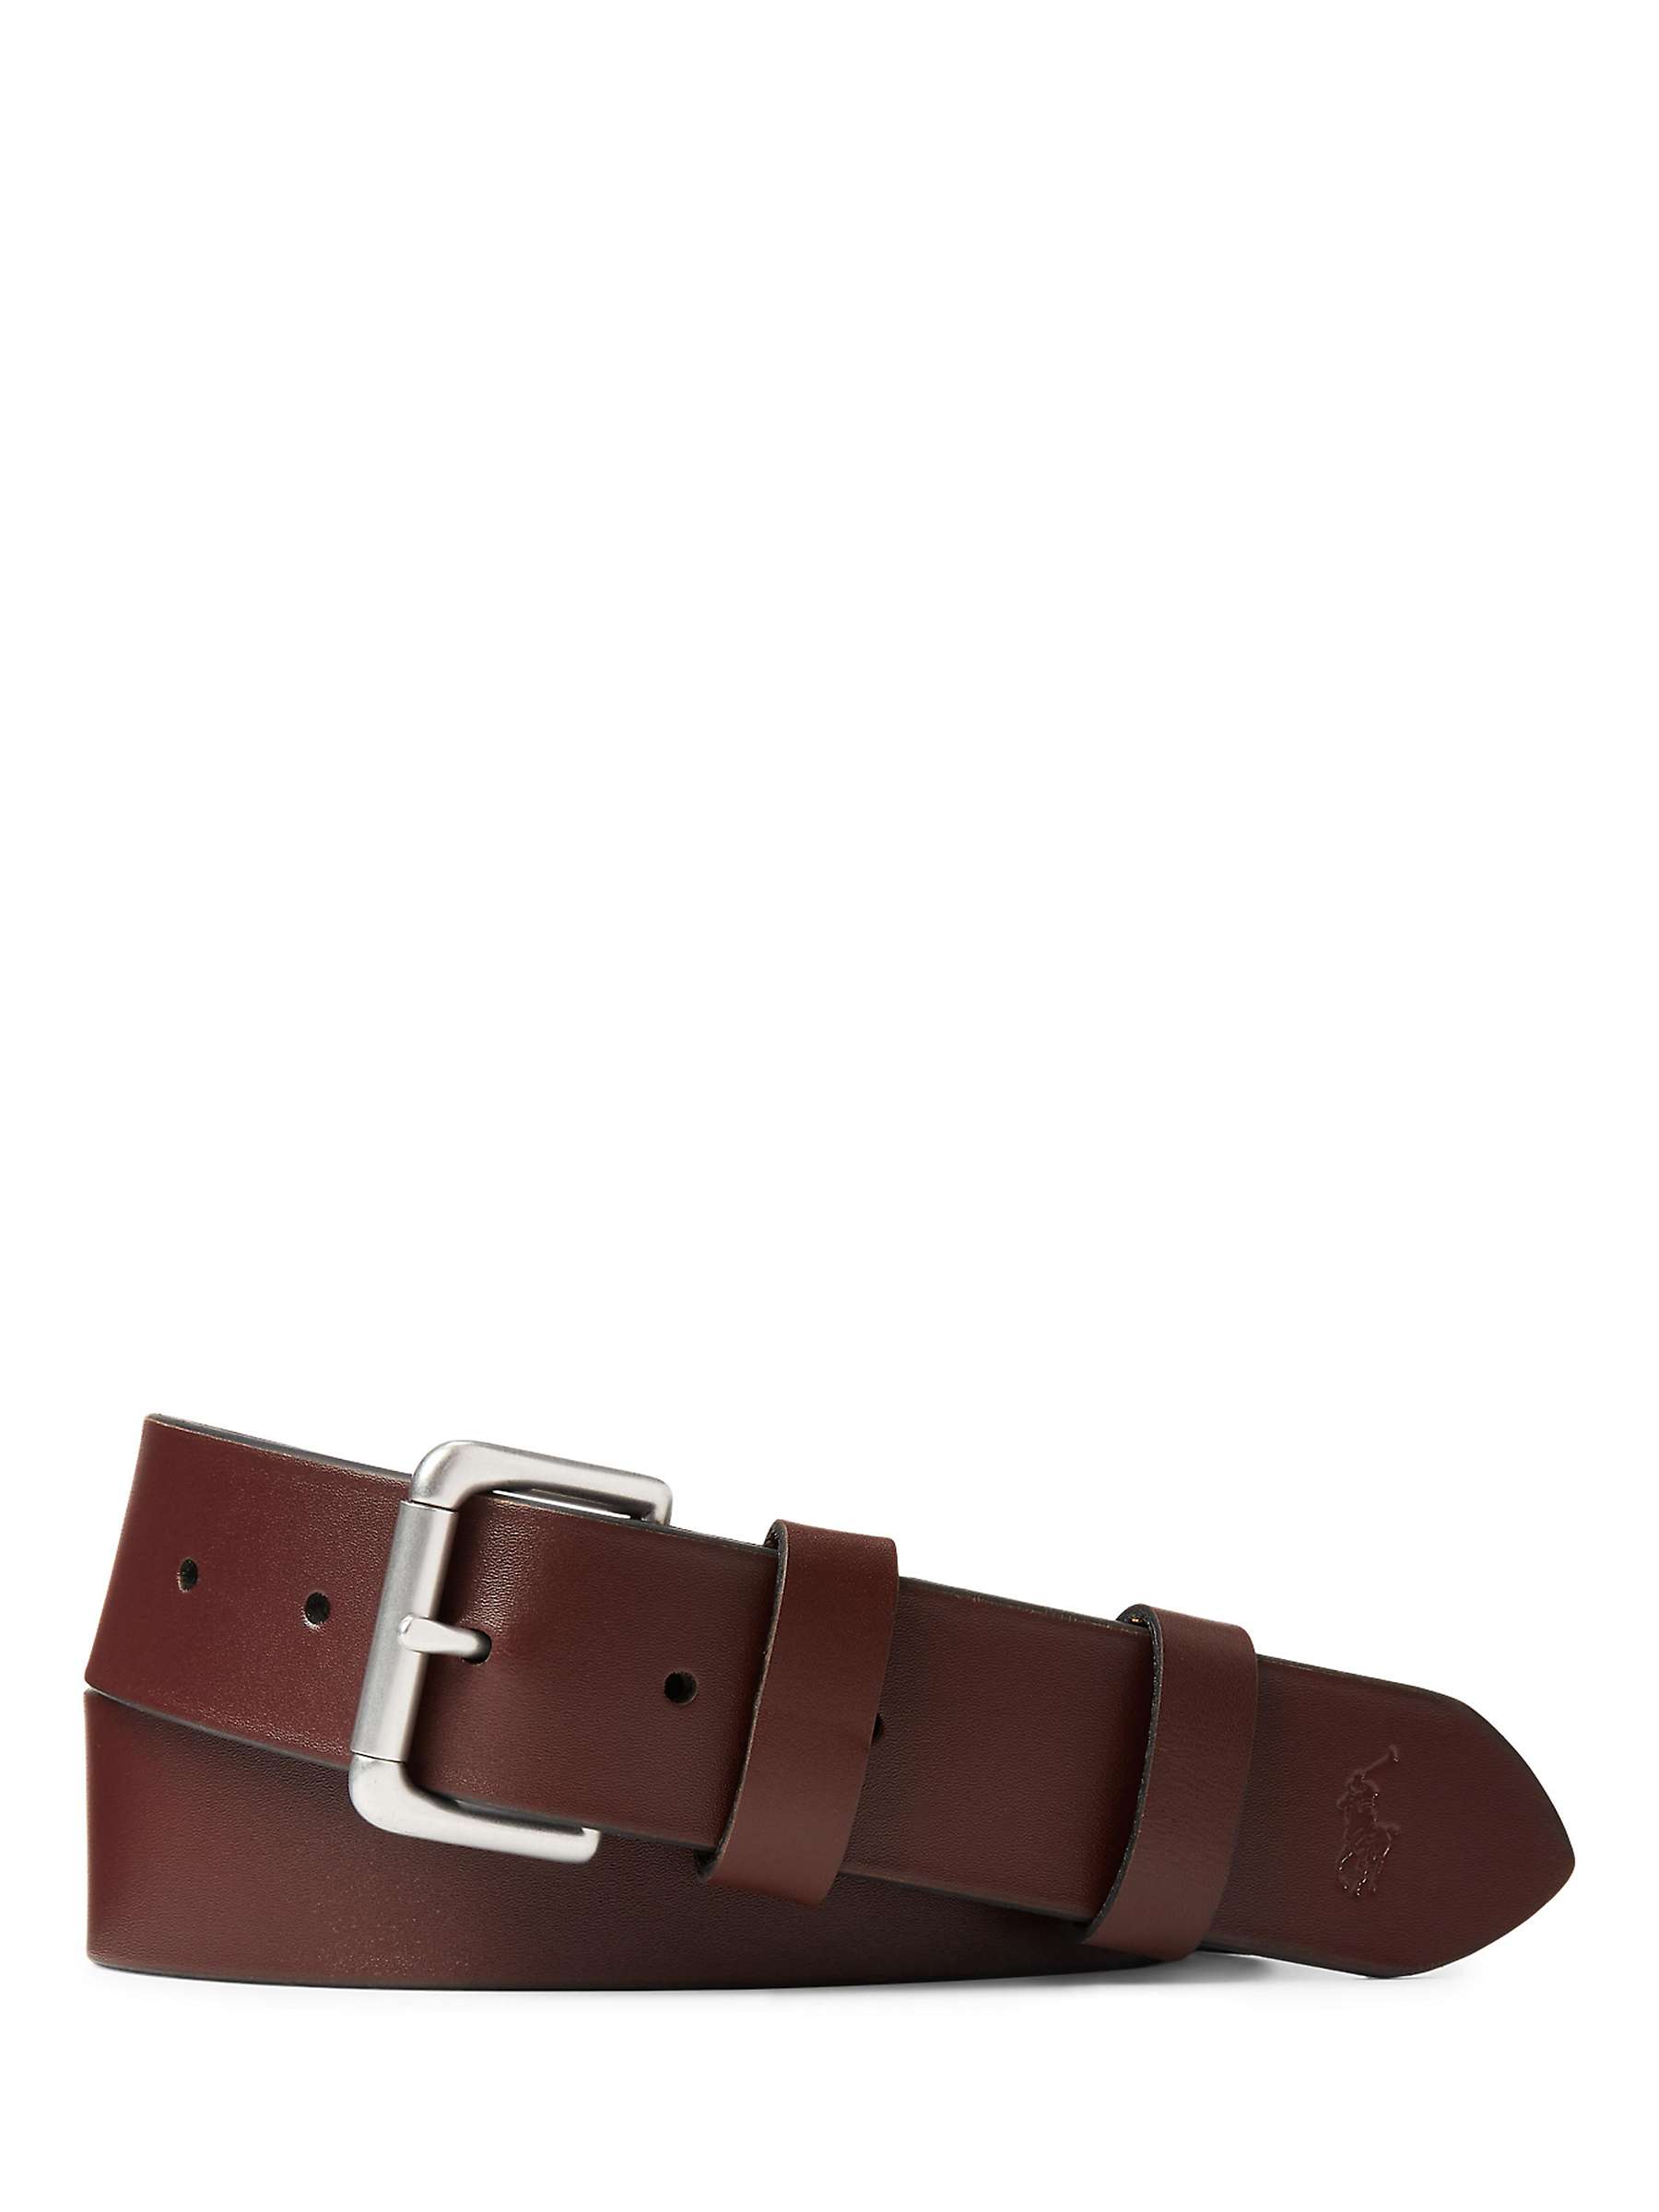 Buy Polo Ralph Lauren Timeless Polished Leather Belt, Brown Online at johnlewis.com